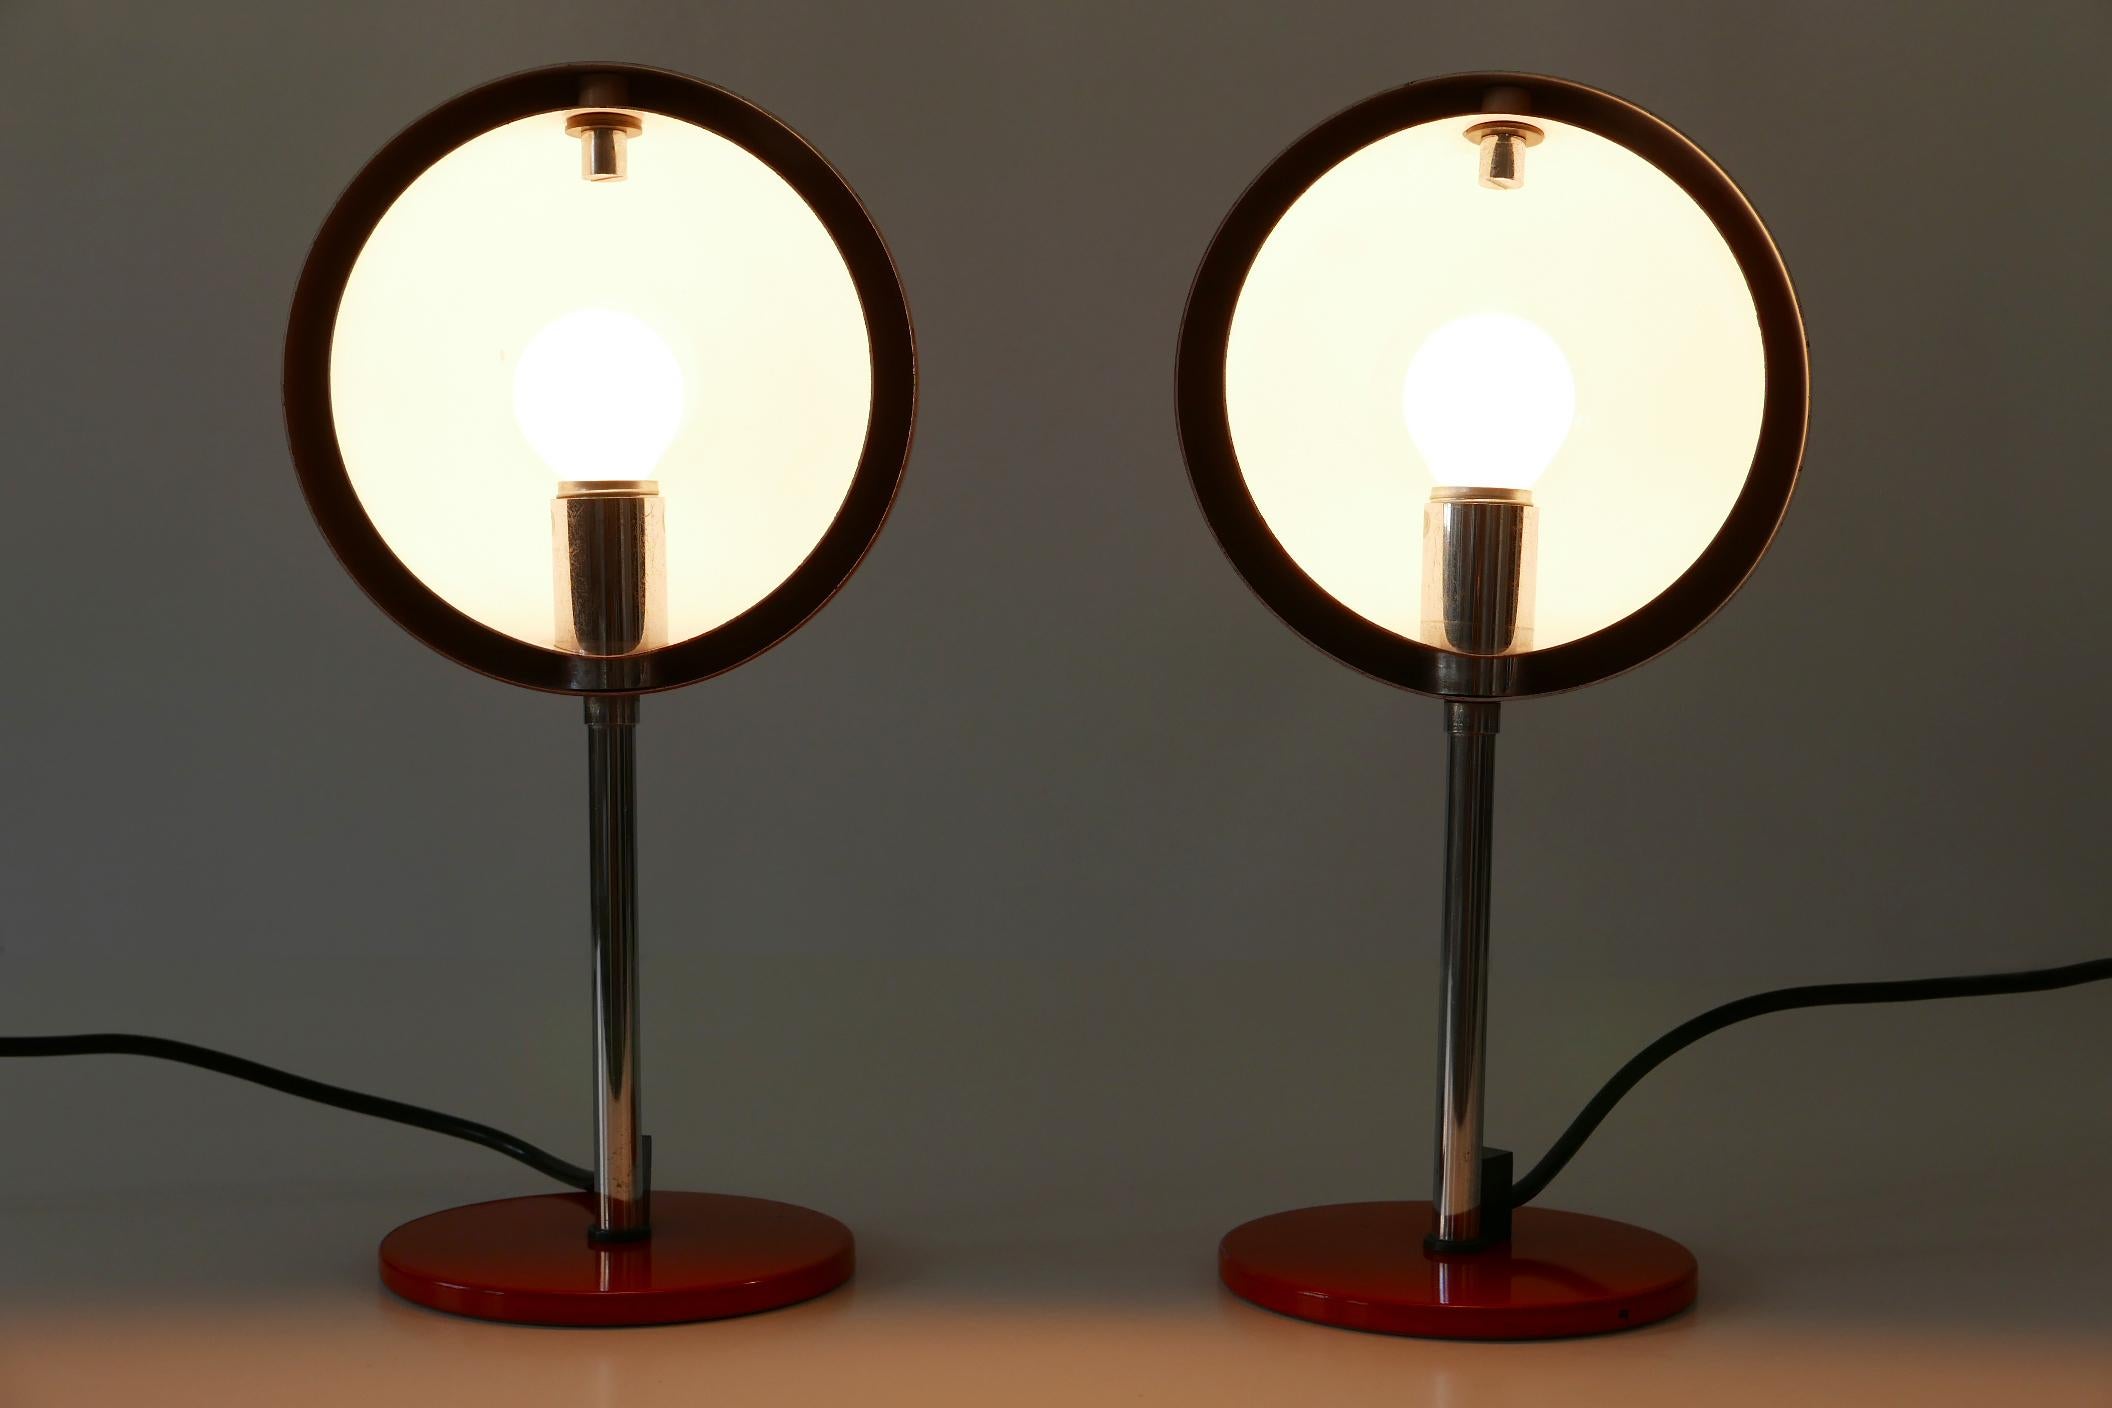 Set of Two Mid-Century Modern Moon Table Lamps by Hustadt-Leuchten 1960s Germany For Sale 3